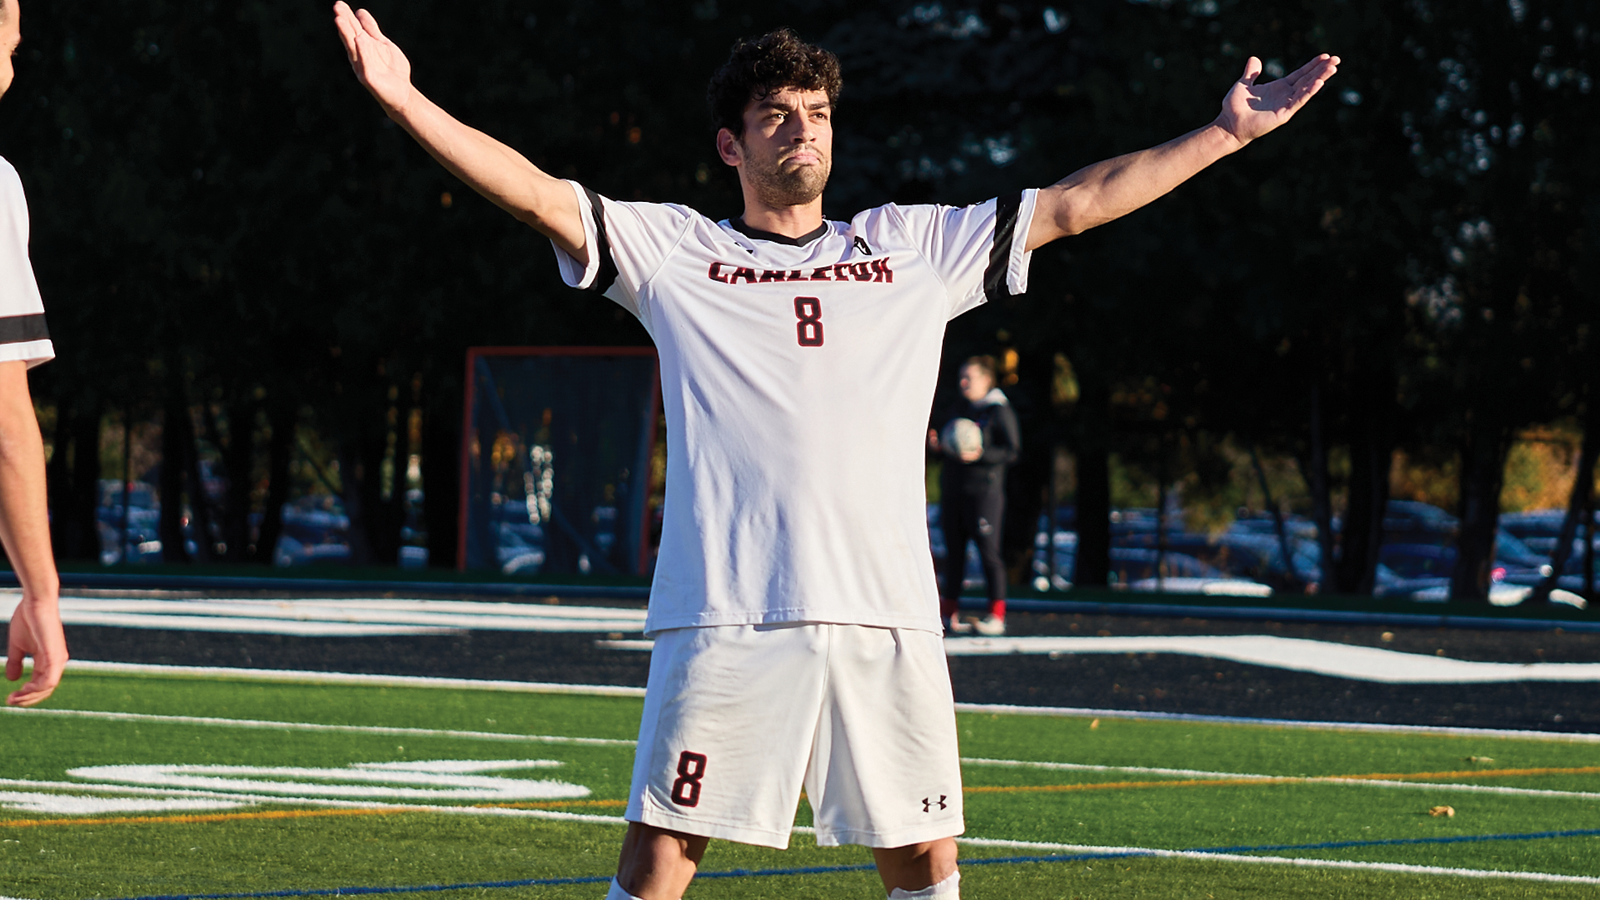 Carleton men's soccer player Luca Piccioli standing in celebration on the field with his arms raised in the air